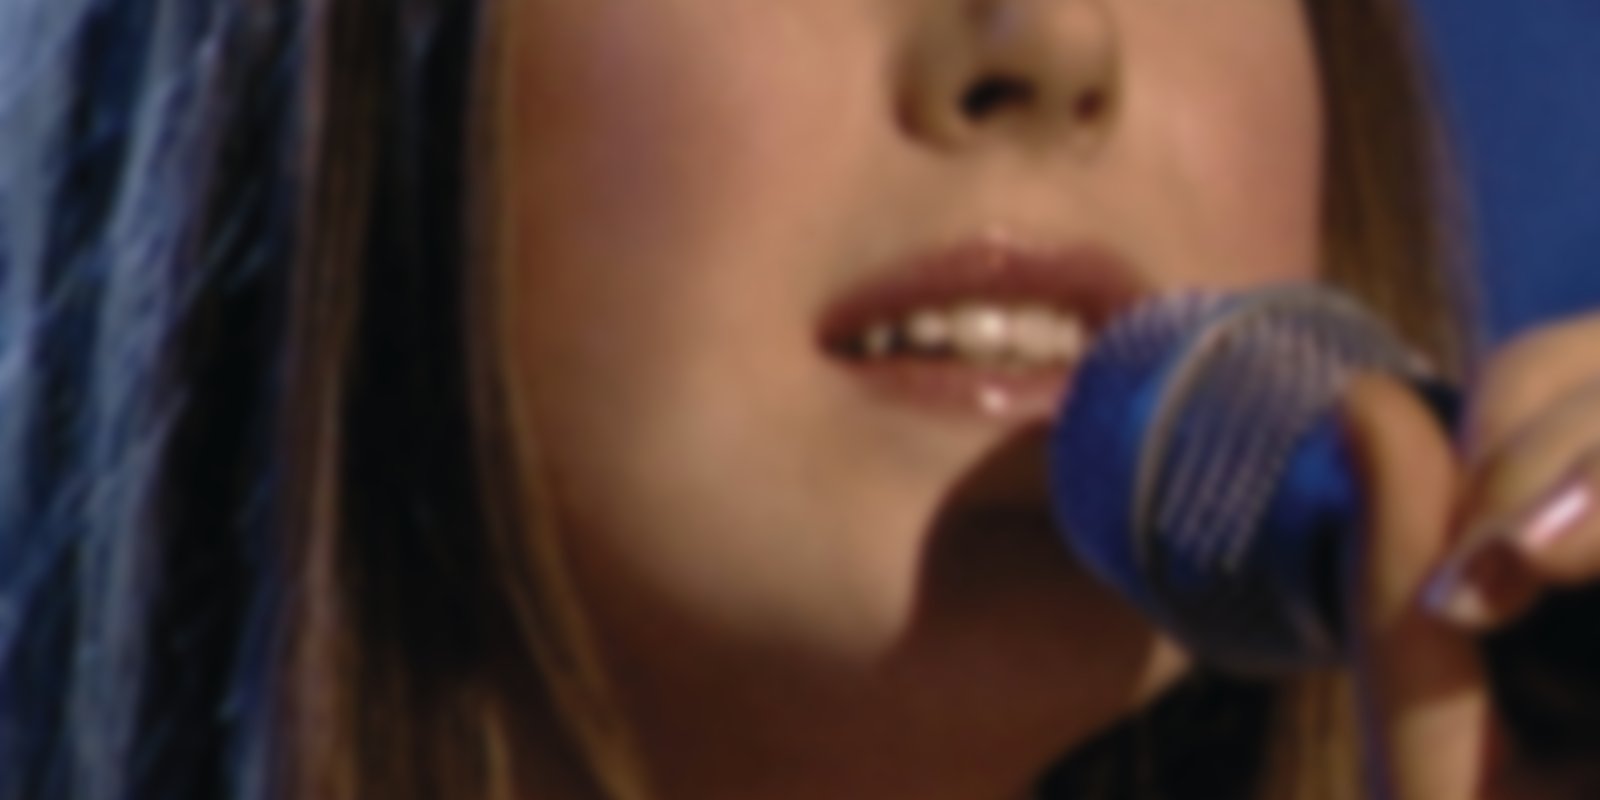 Hayley Westenra - Live from New Zealand